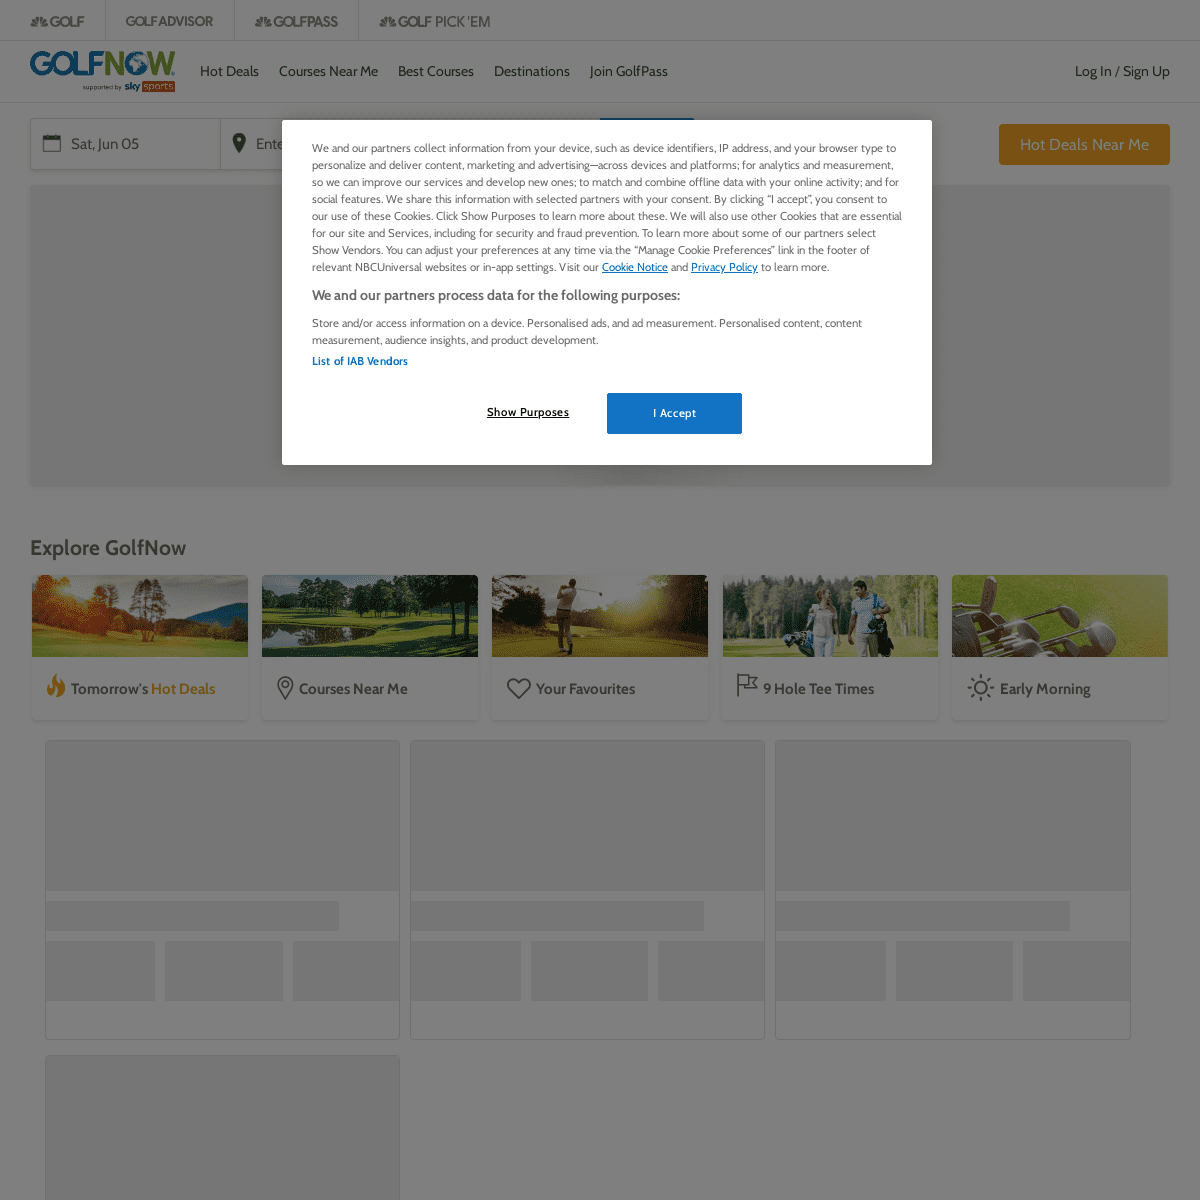 A complete backup of https://golfnow.co.uk